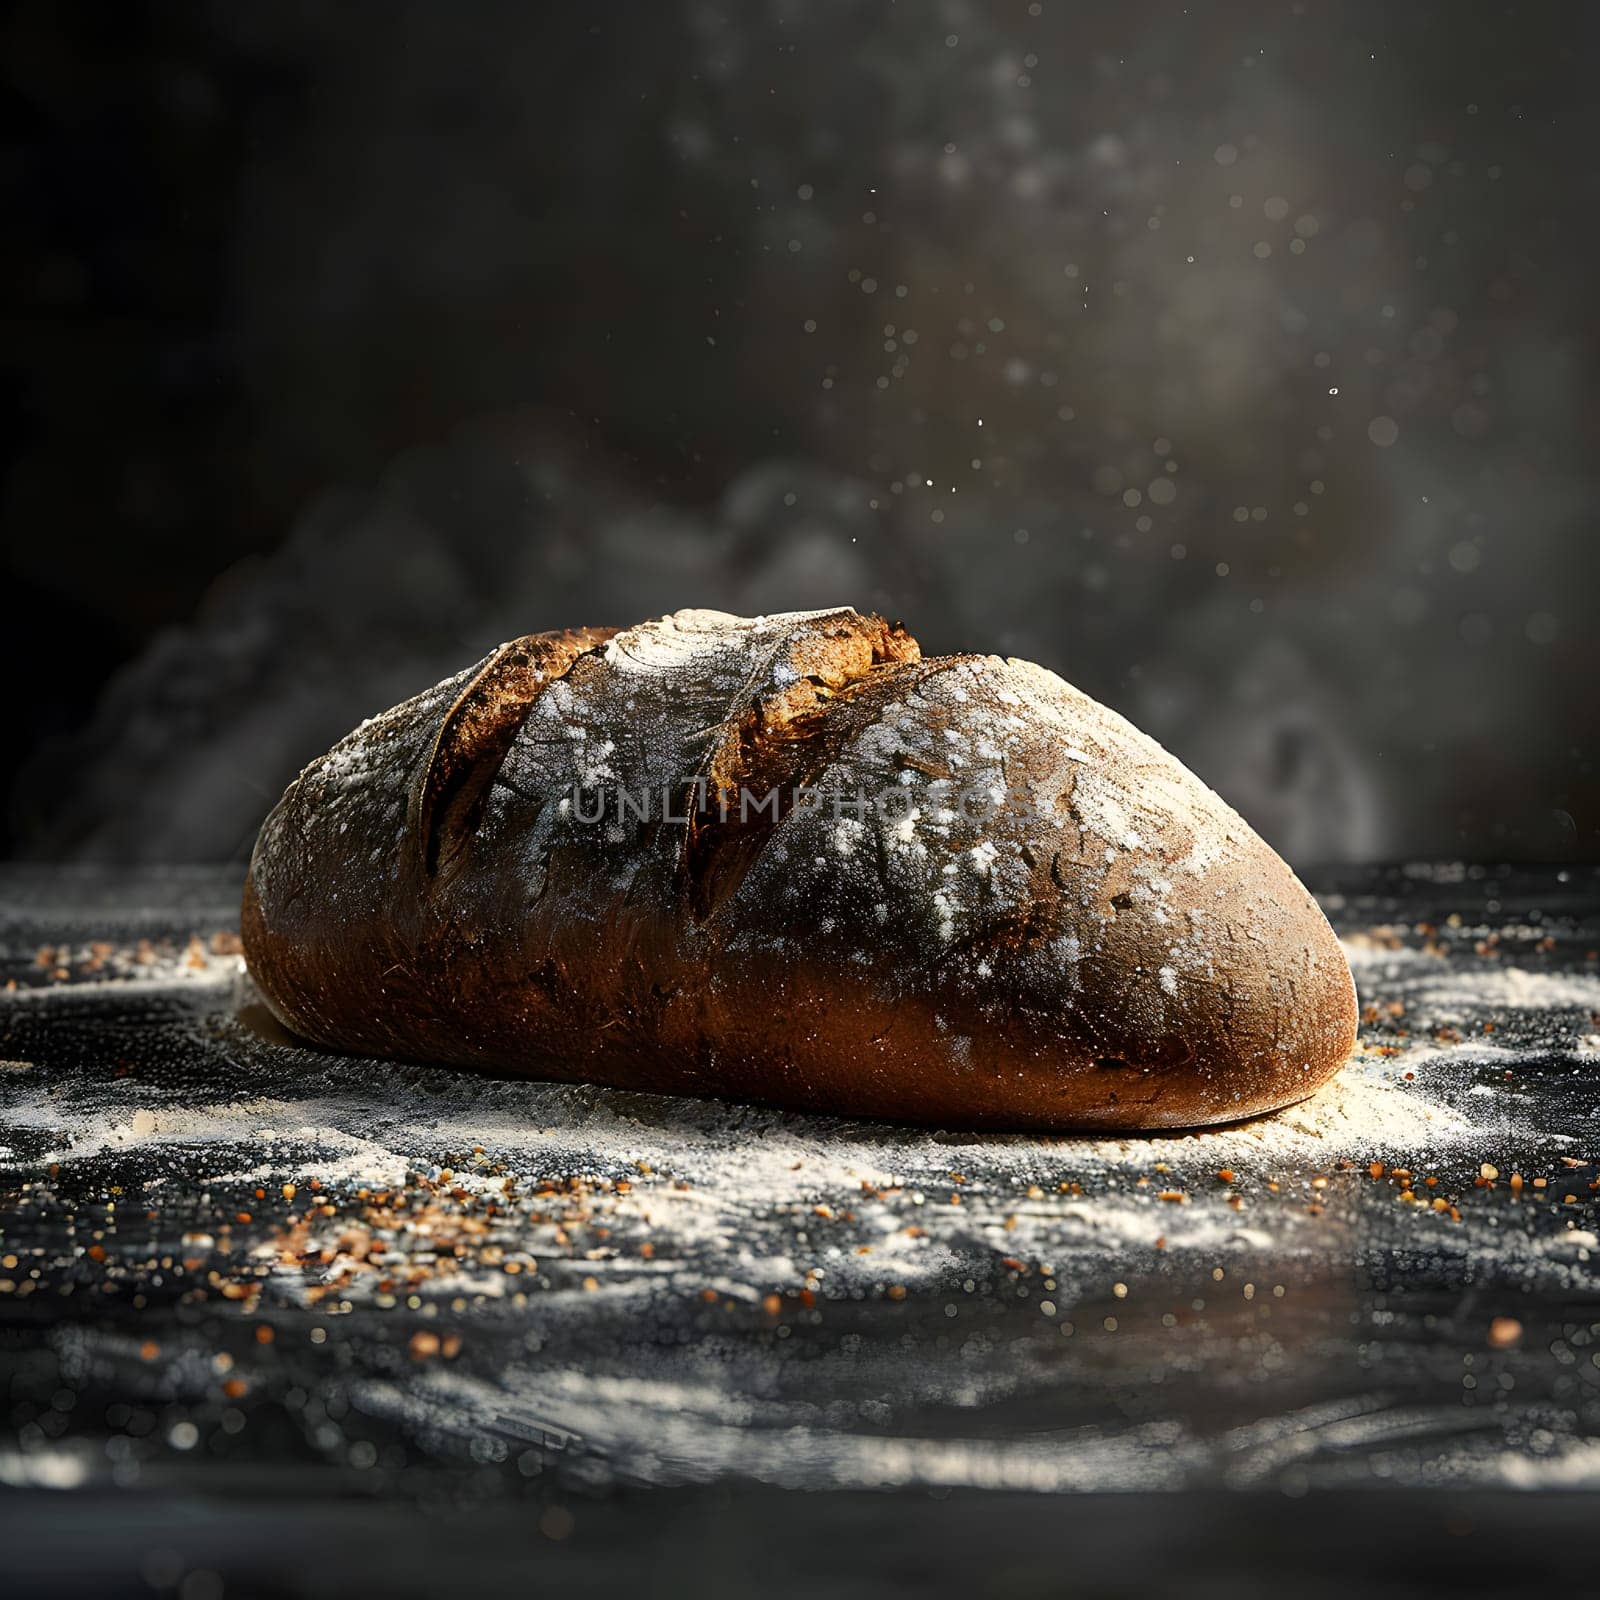 A plantbased food ingredient, a loaf of bread, is displayed on a wooden table covered in flour. The still life photography captures the beauty of this simple scene